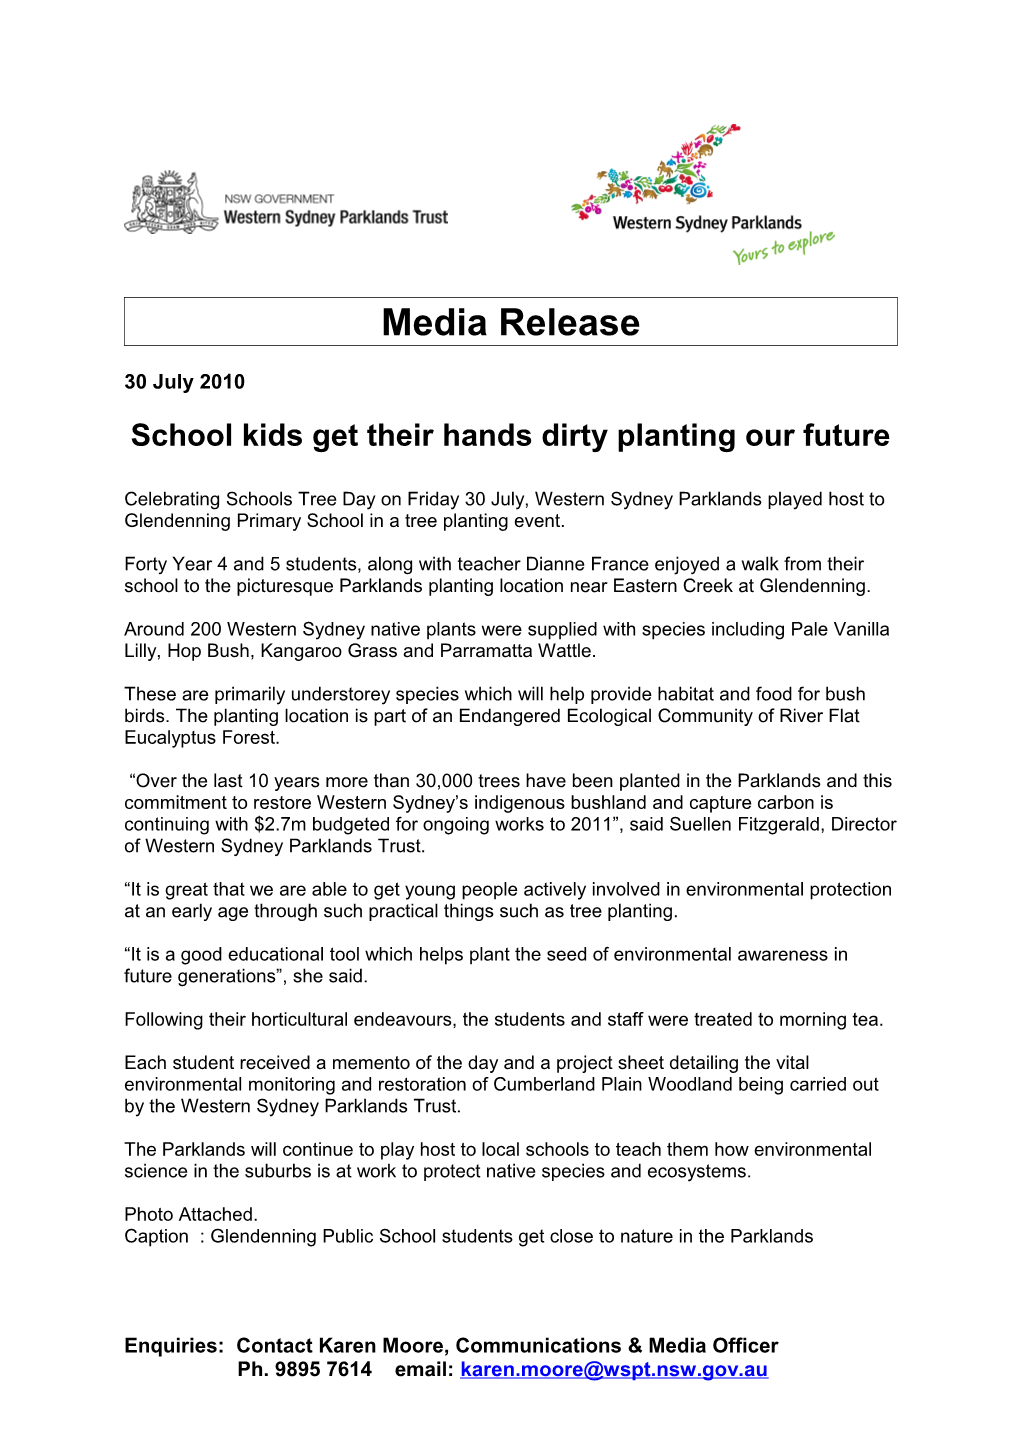 School Kids Get Their Hands Dirty Planting Our Future